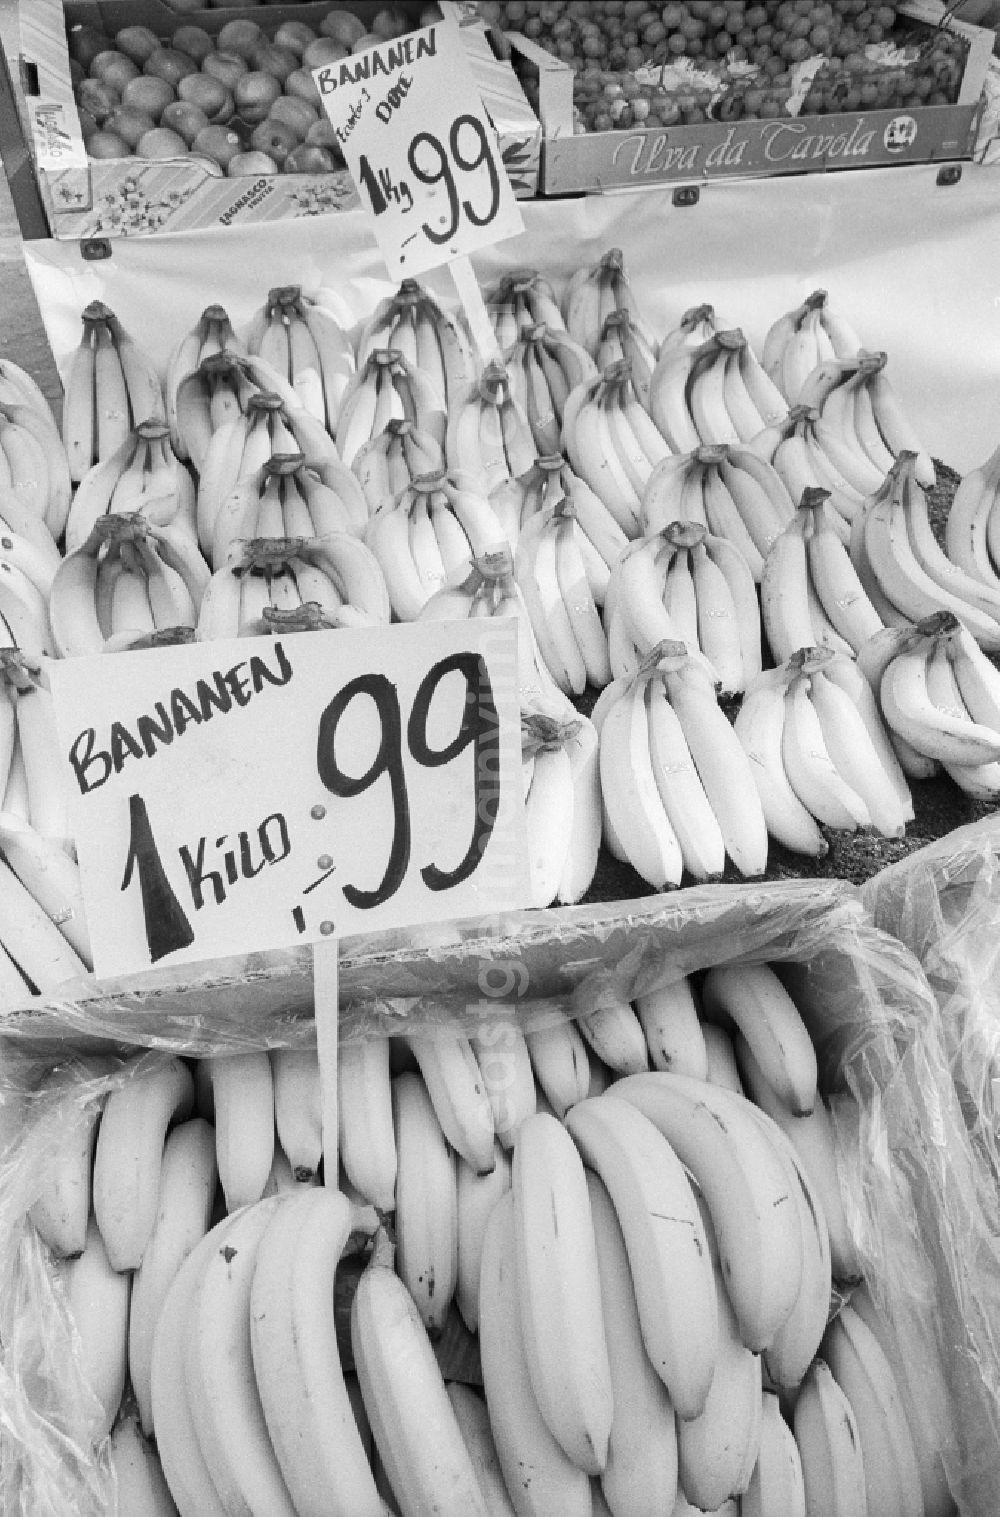 Berlin: Sale of bananas at a market stall. Price tags indicate the price,